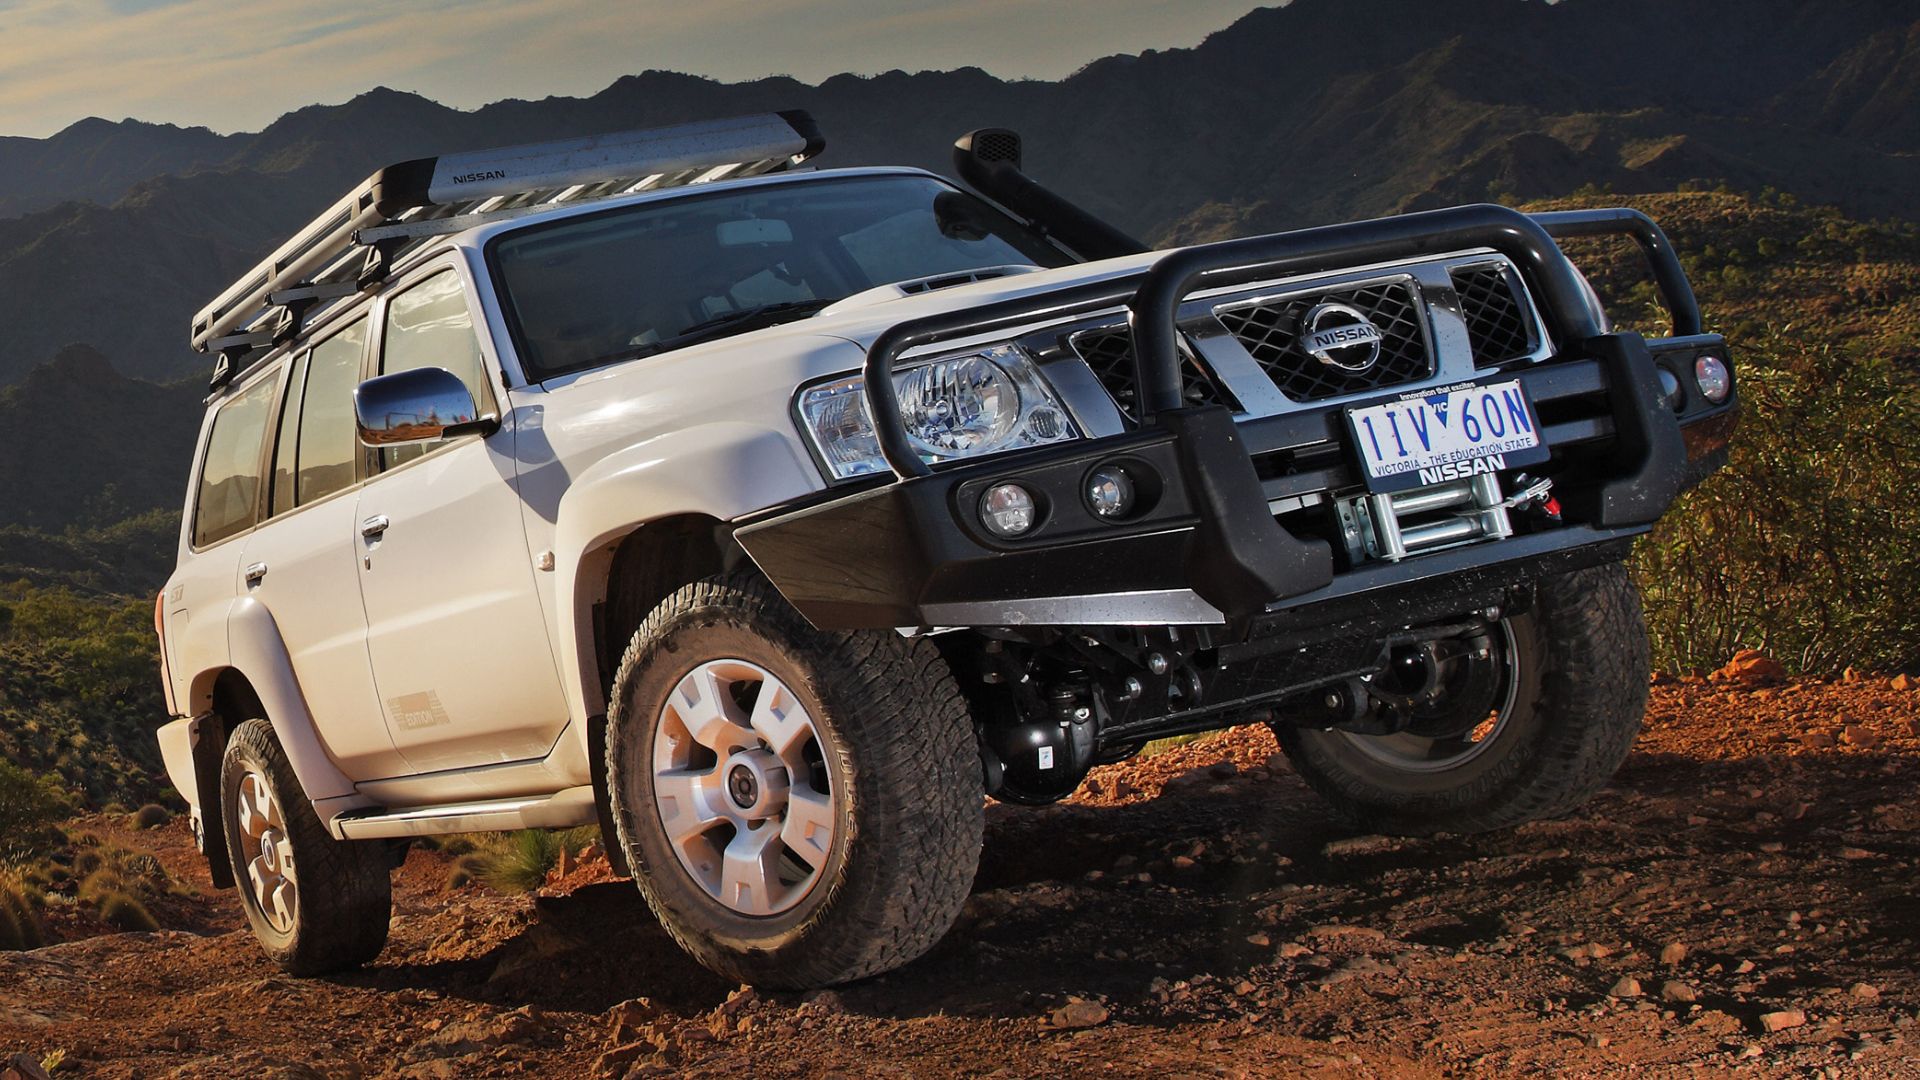 The Legend Edition of the Nissan Patrol Y61